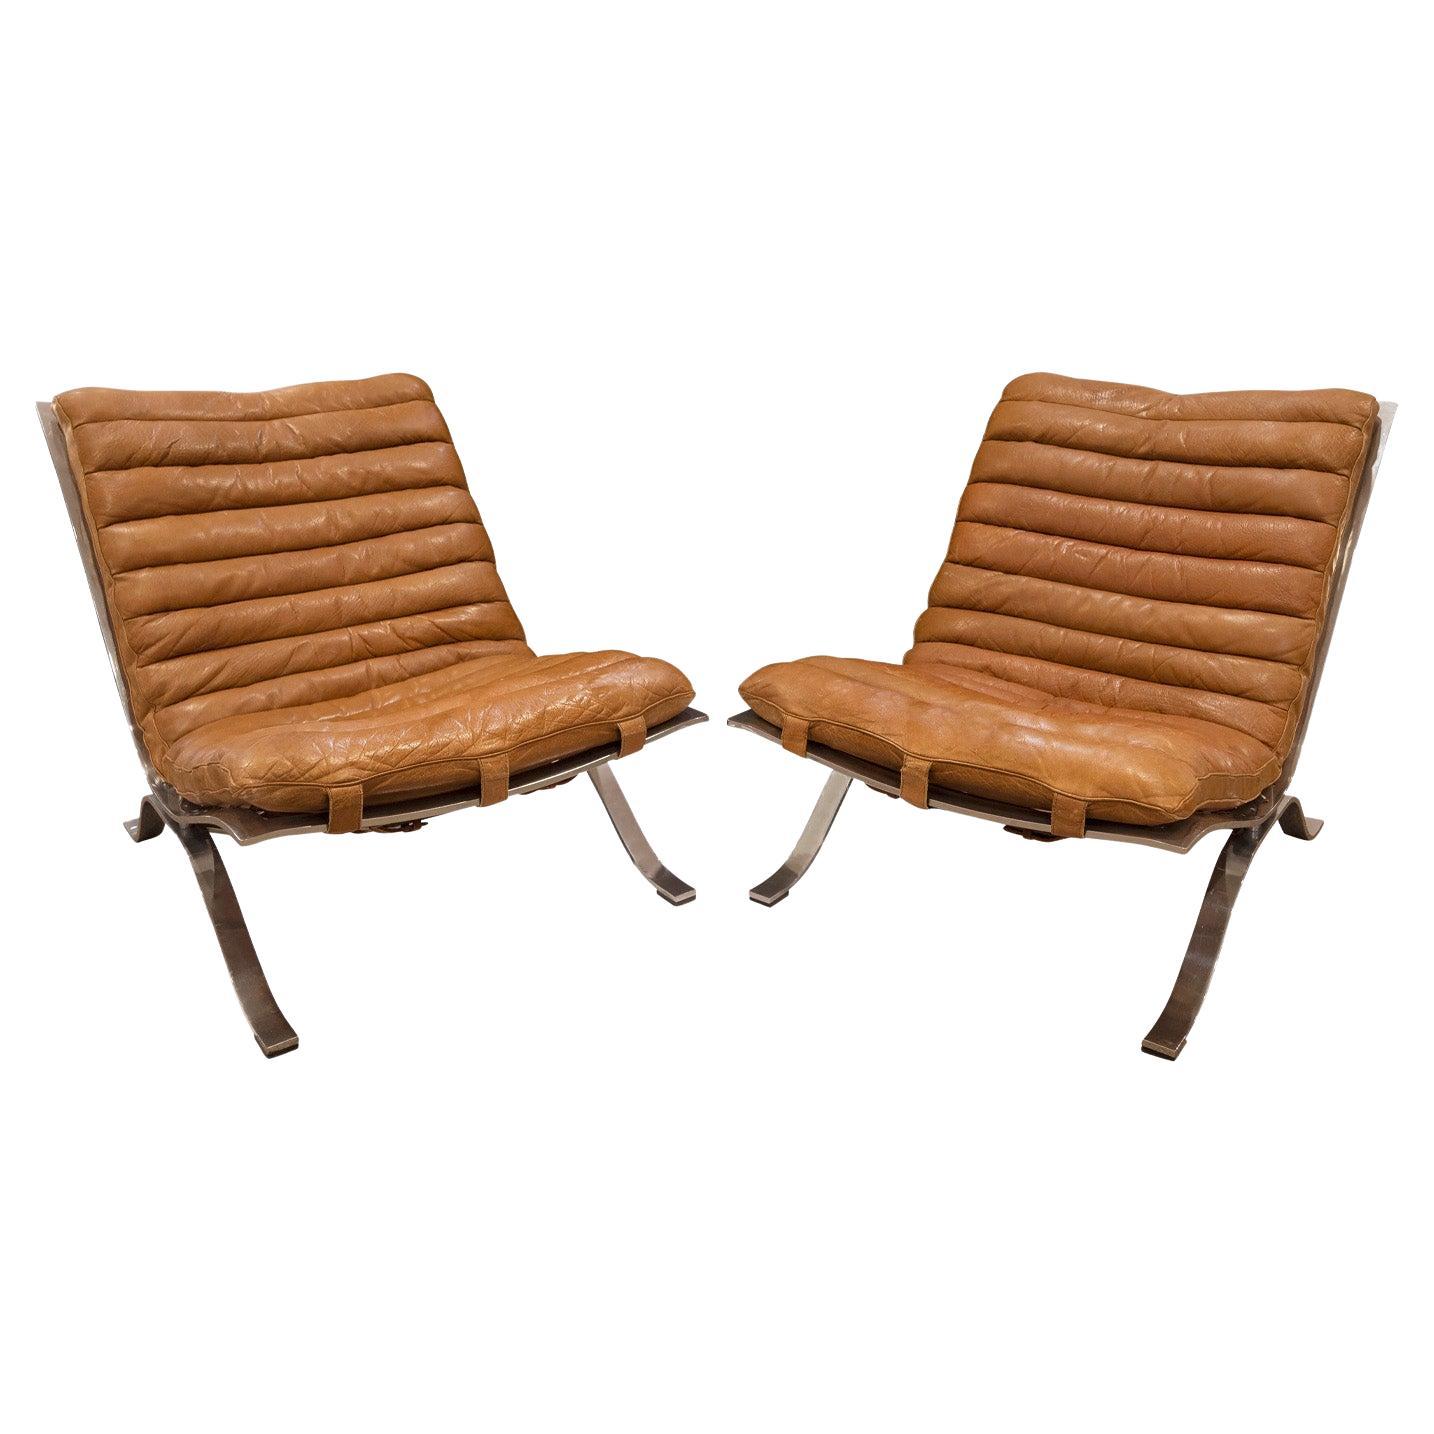 Arne Norell Pair of Lounge Chairs with Original Leather Slings 1960s (Signed)